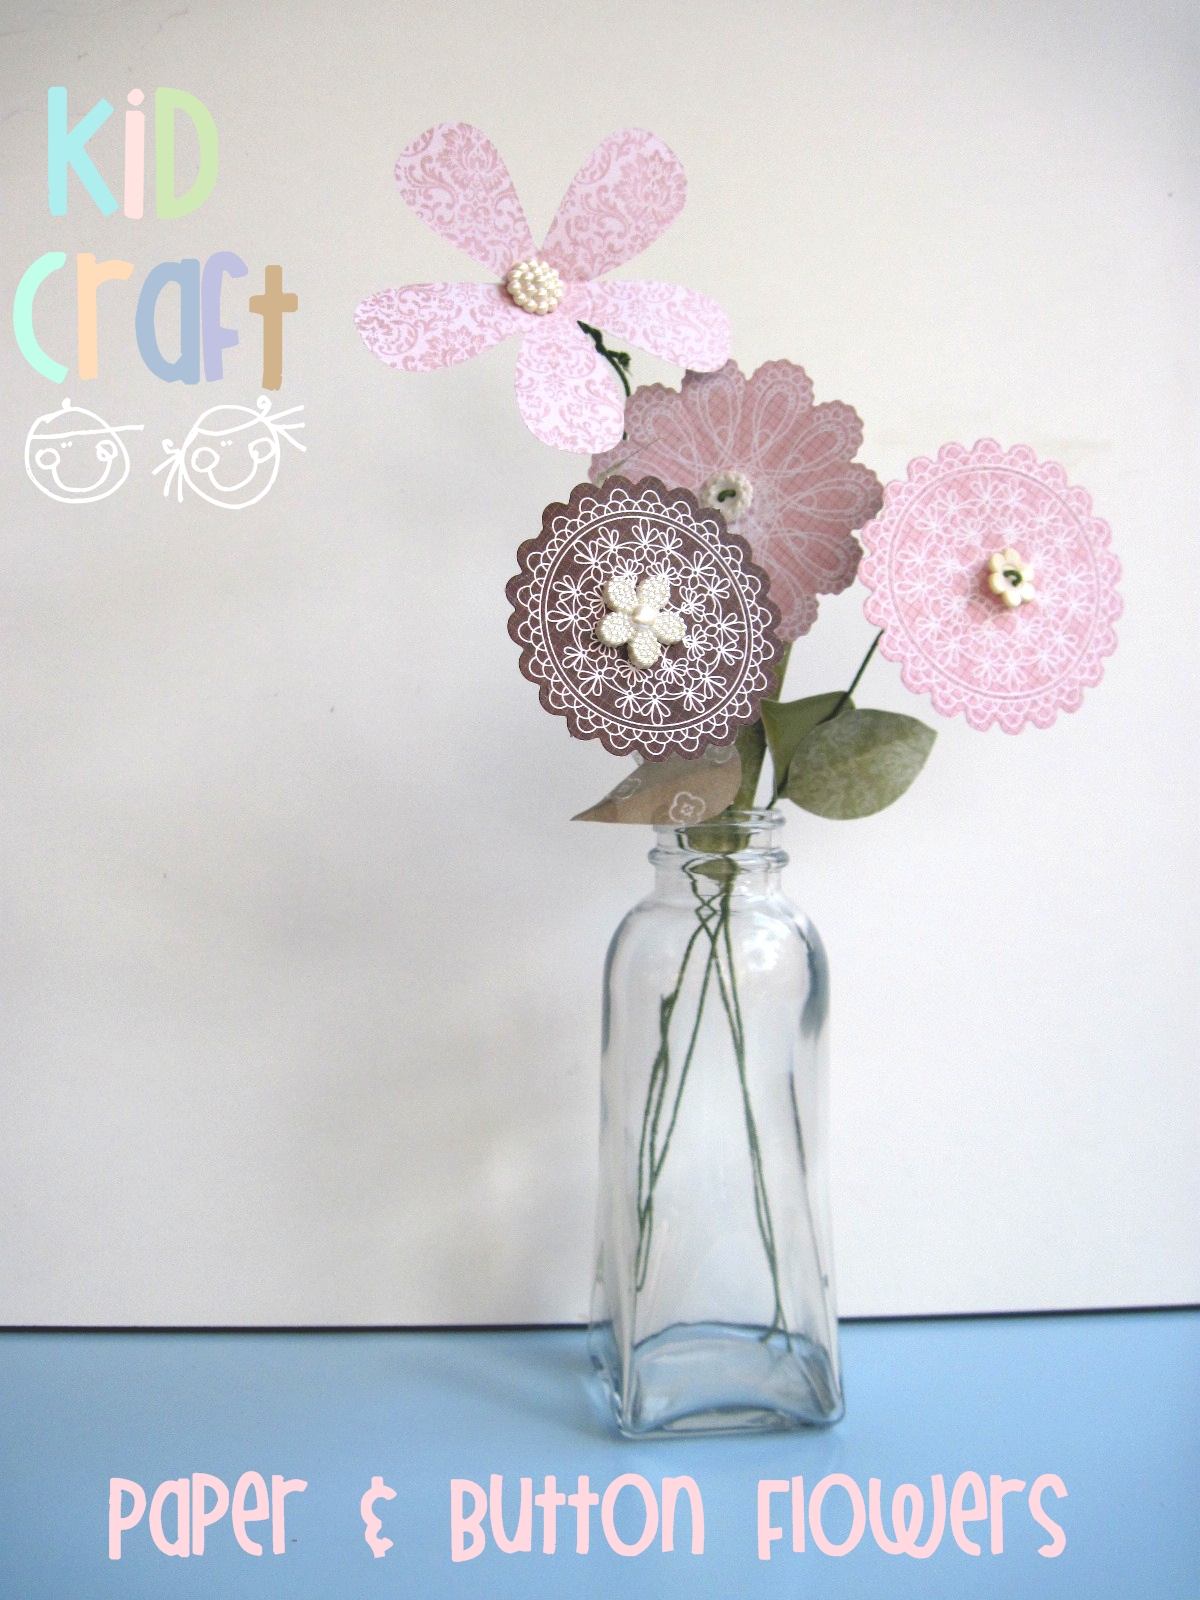 Tissue paper flowers - The Craft Train